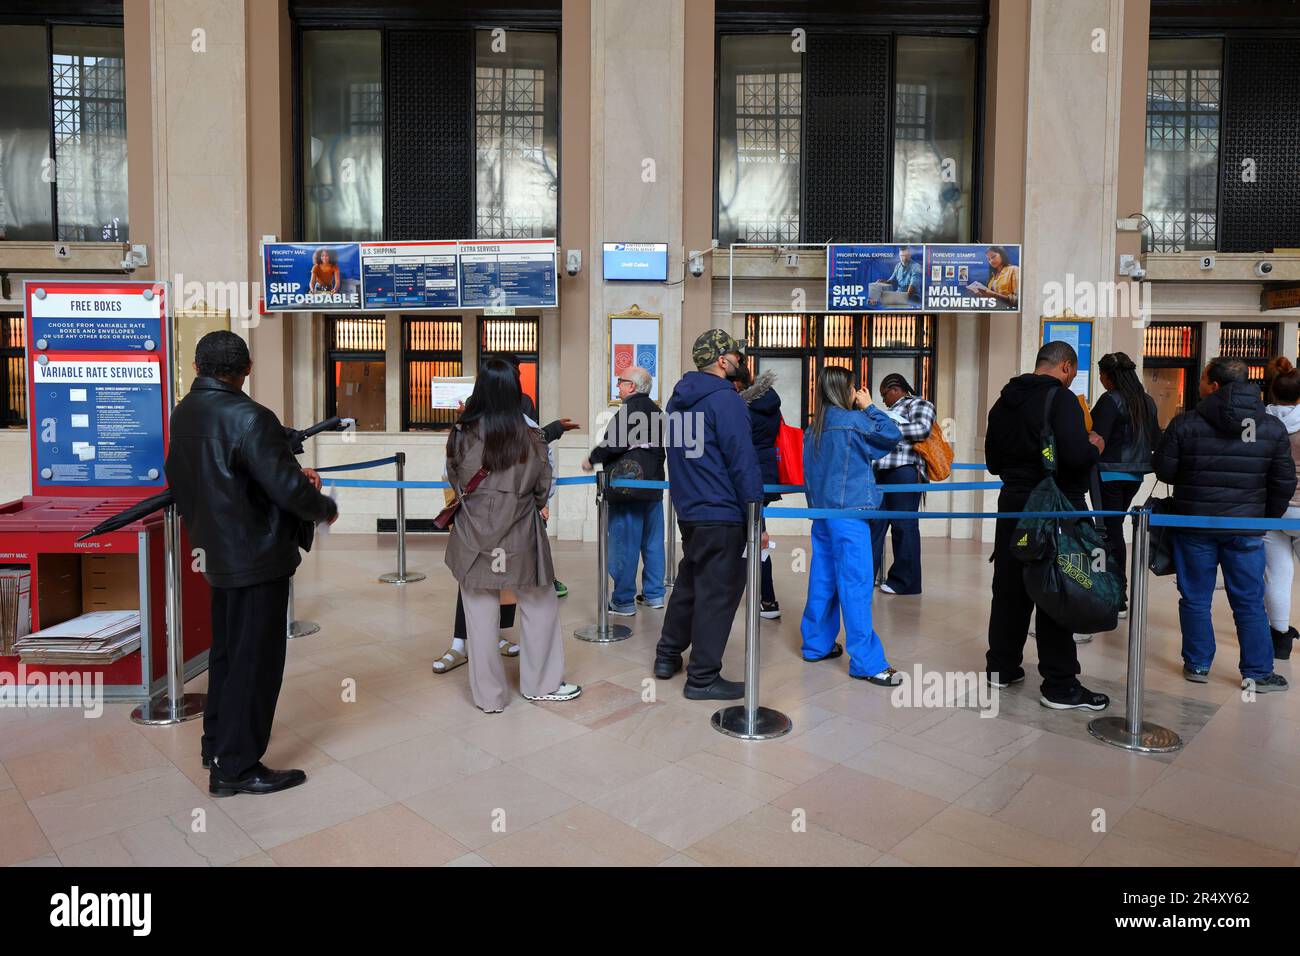 People queue inside the James A Farley Post Office in Midtown Manhattan, New York to buy stamps and other postal services. Stock Photo